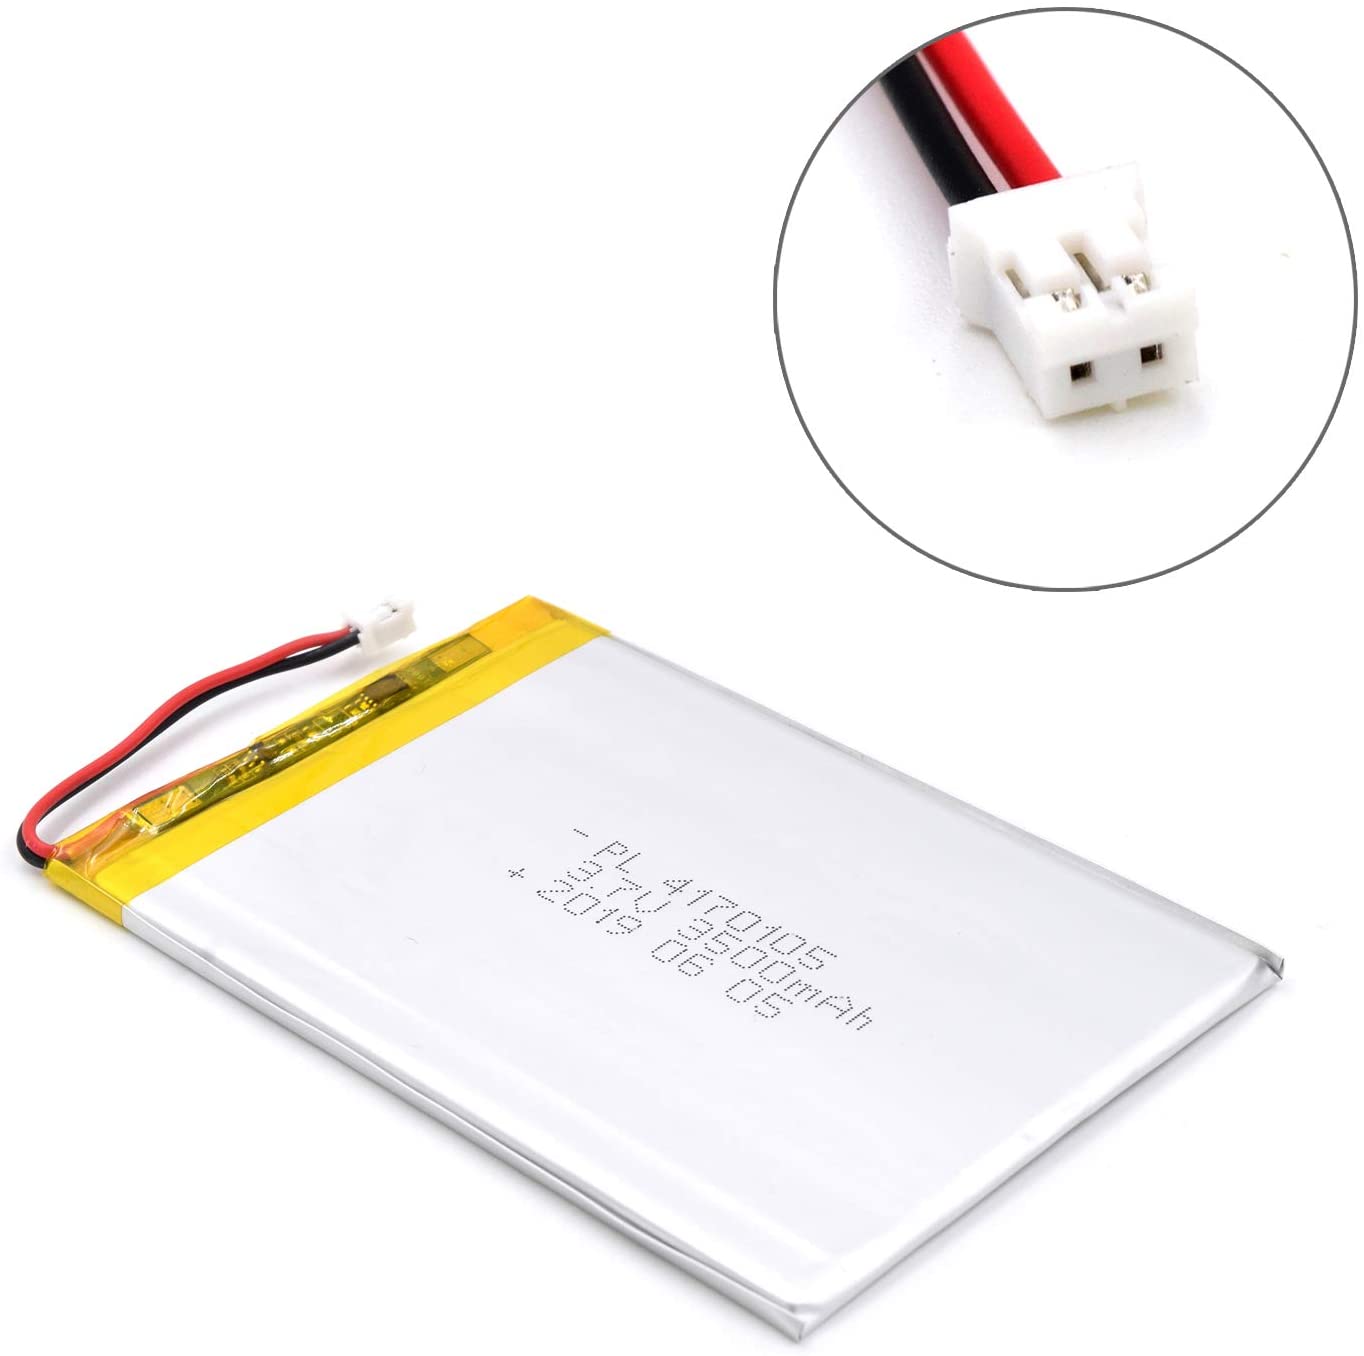 YDL 3.7V 3500mAh 4170105 Rechargeable Lithium Polymer Battery Length 107mm